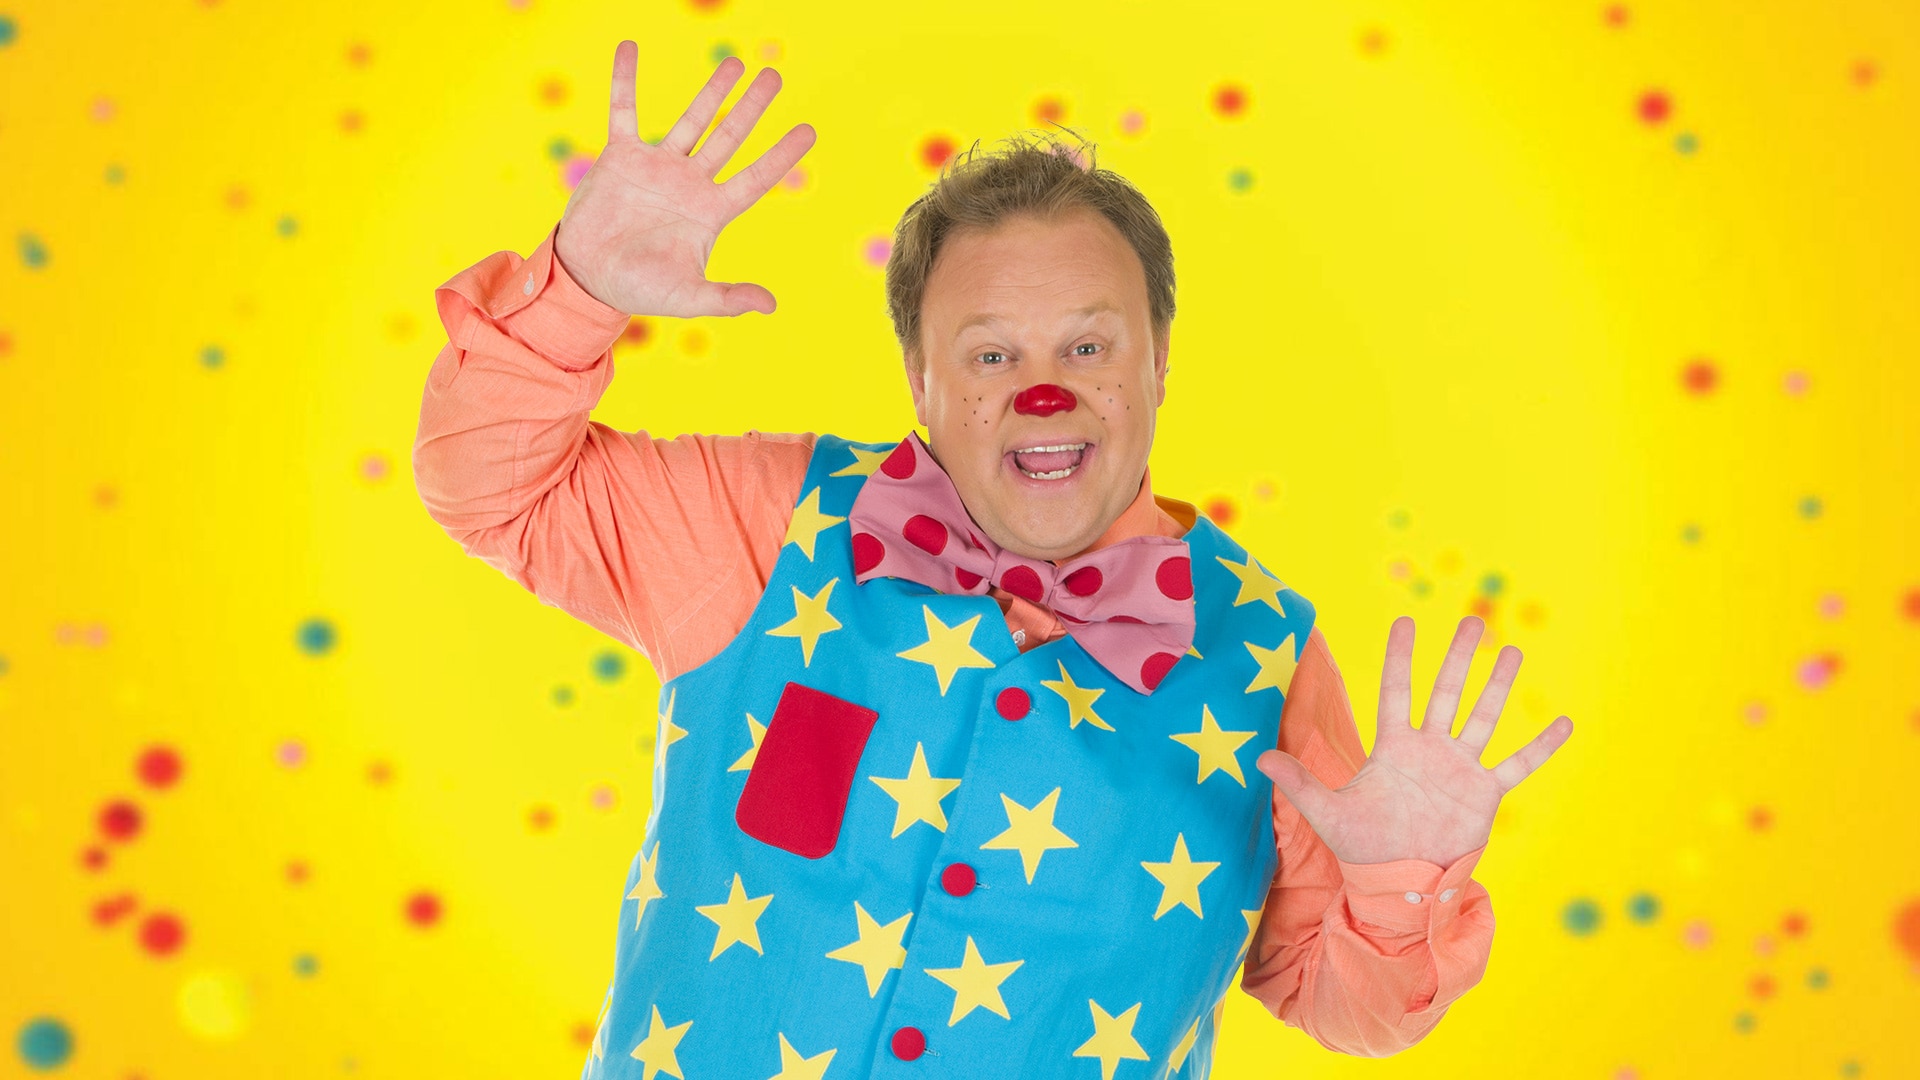 At Home with Mr Tumble. Season 1 Episode 18